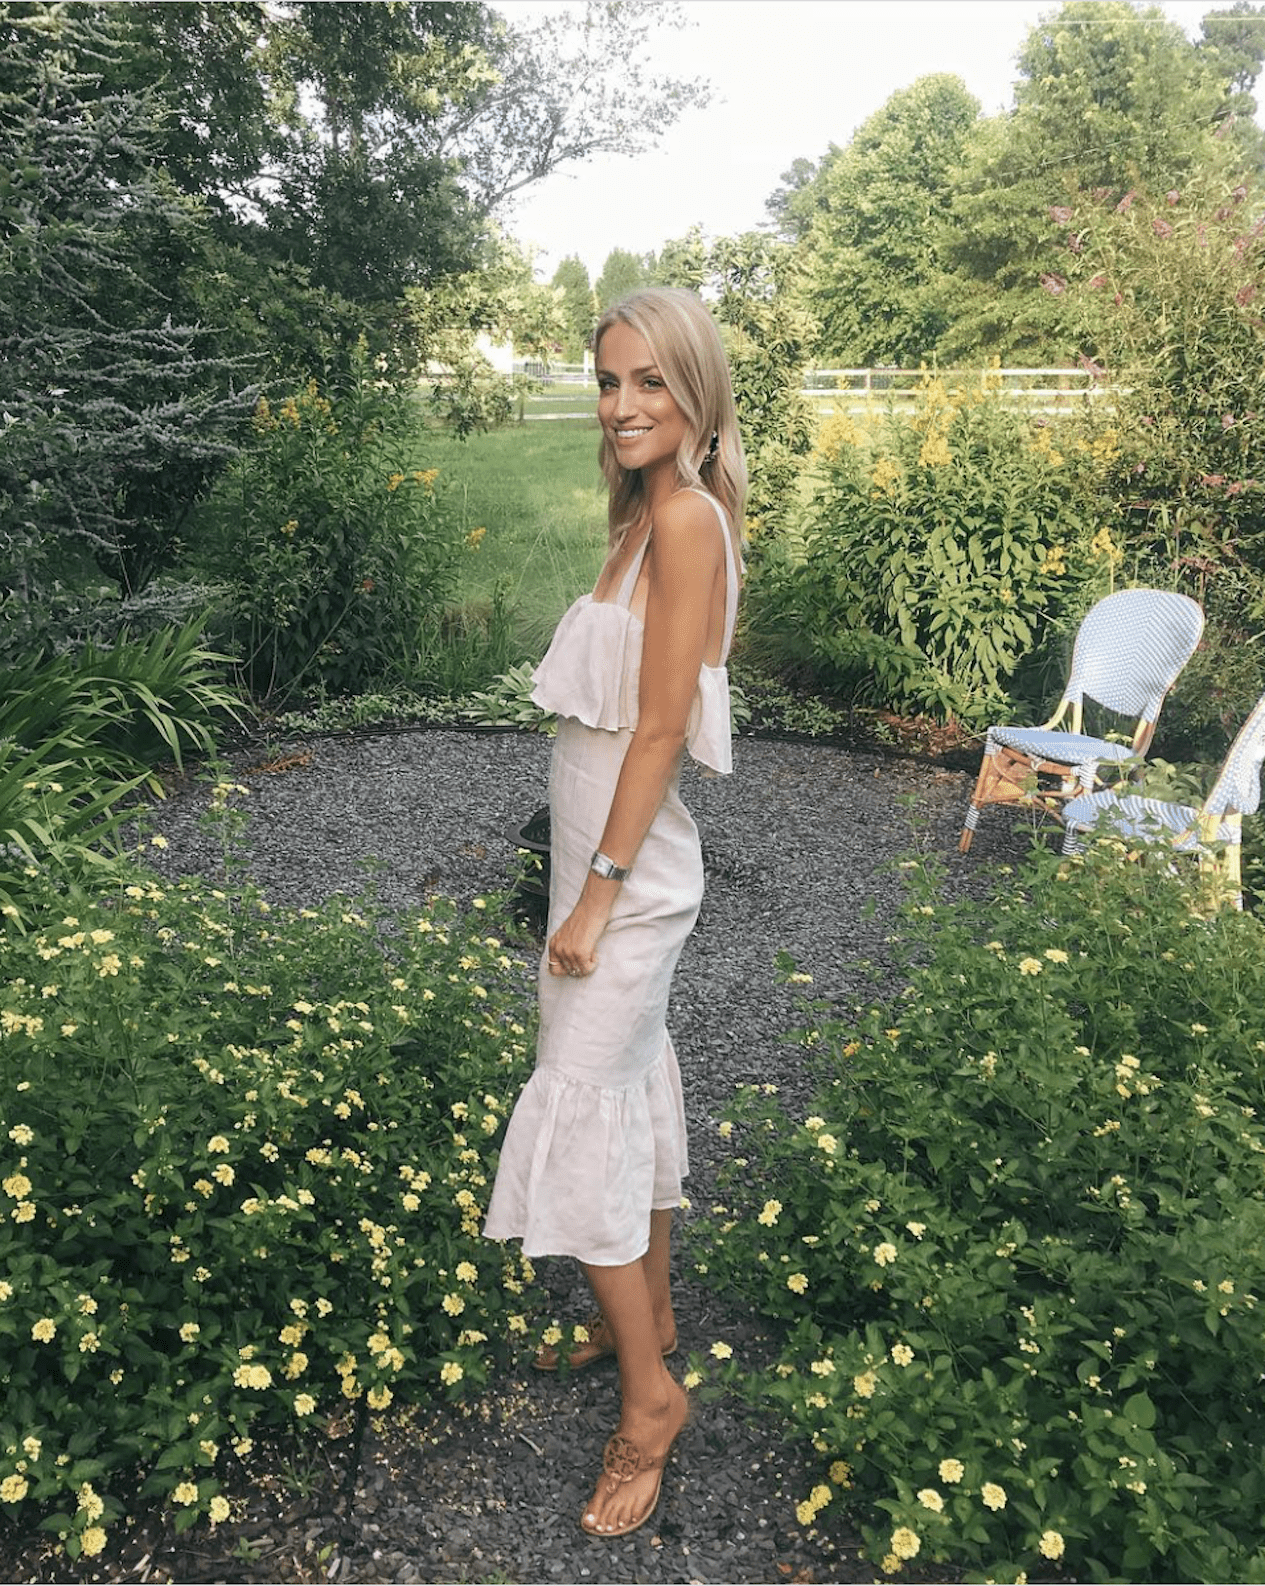 image of a woman in a white linen midi dress standing in a garden area